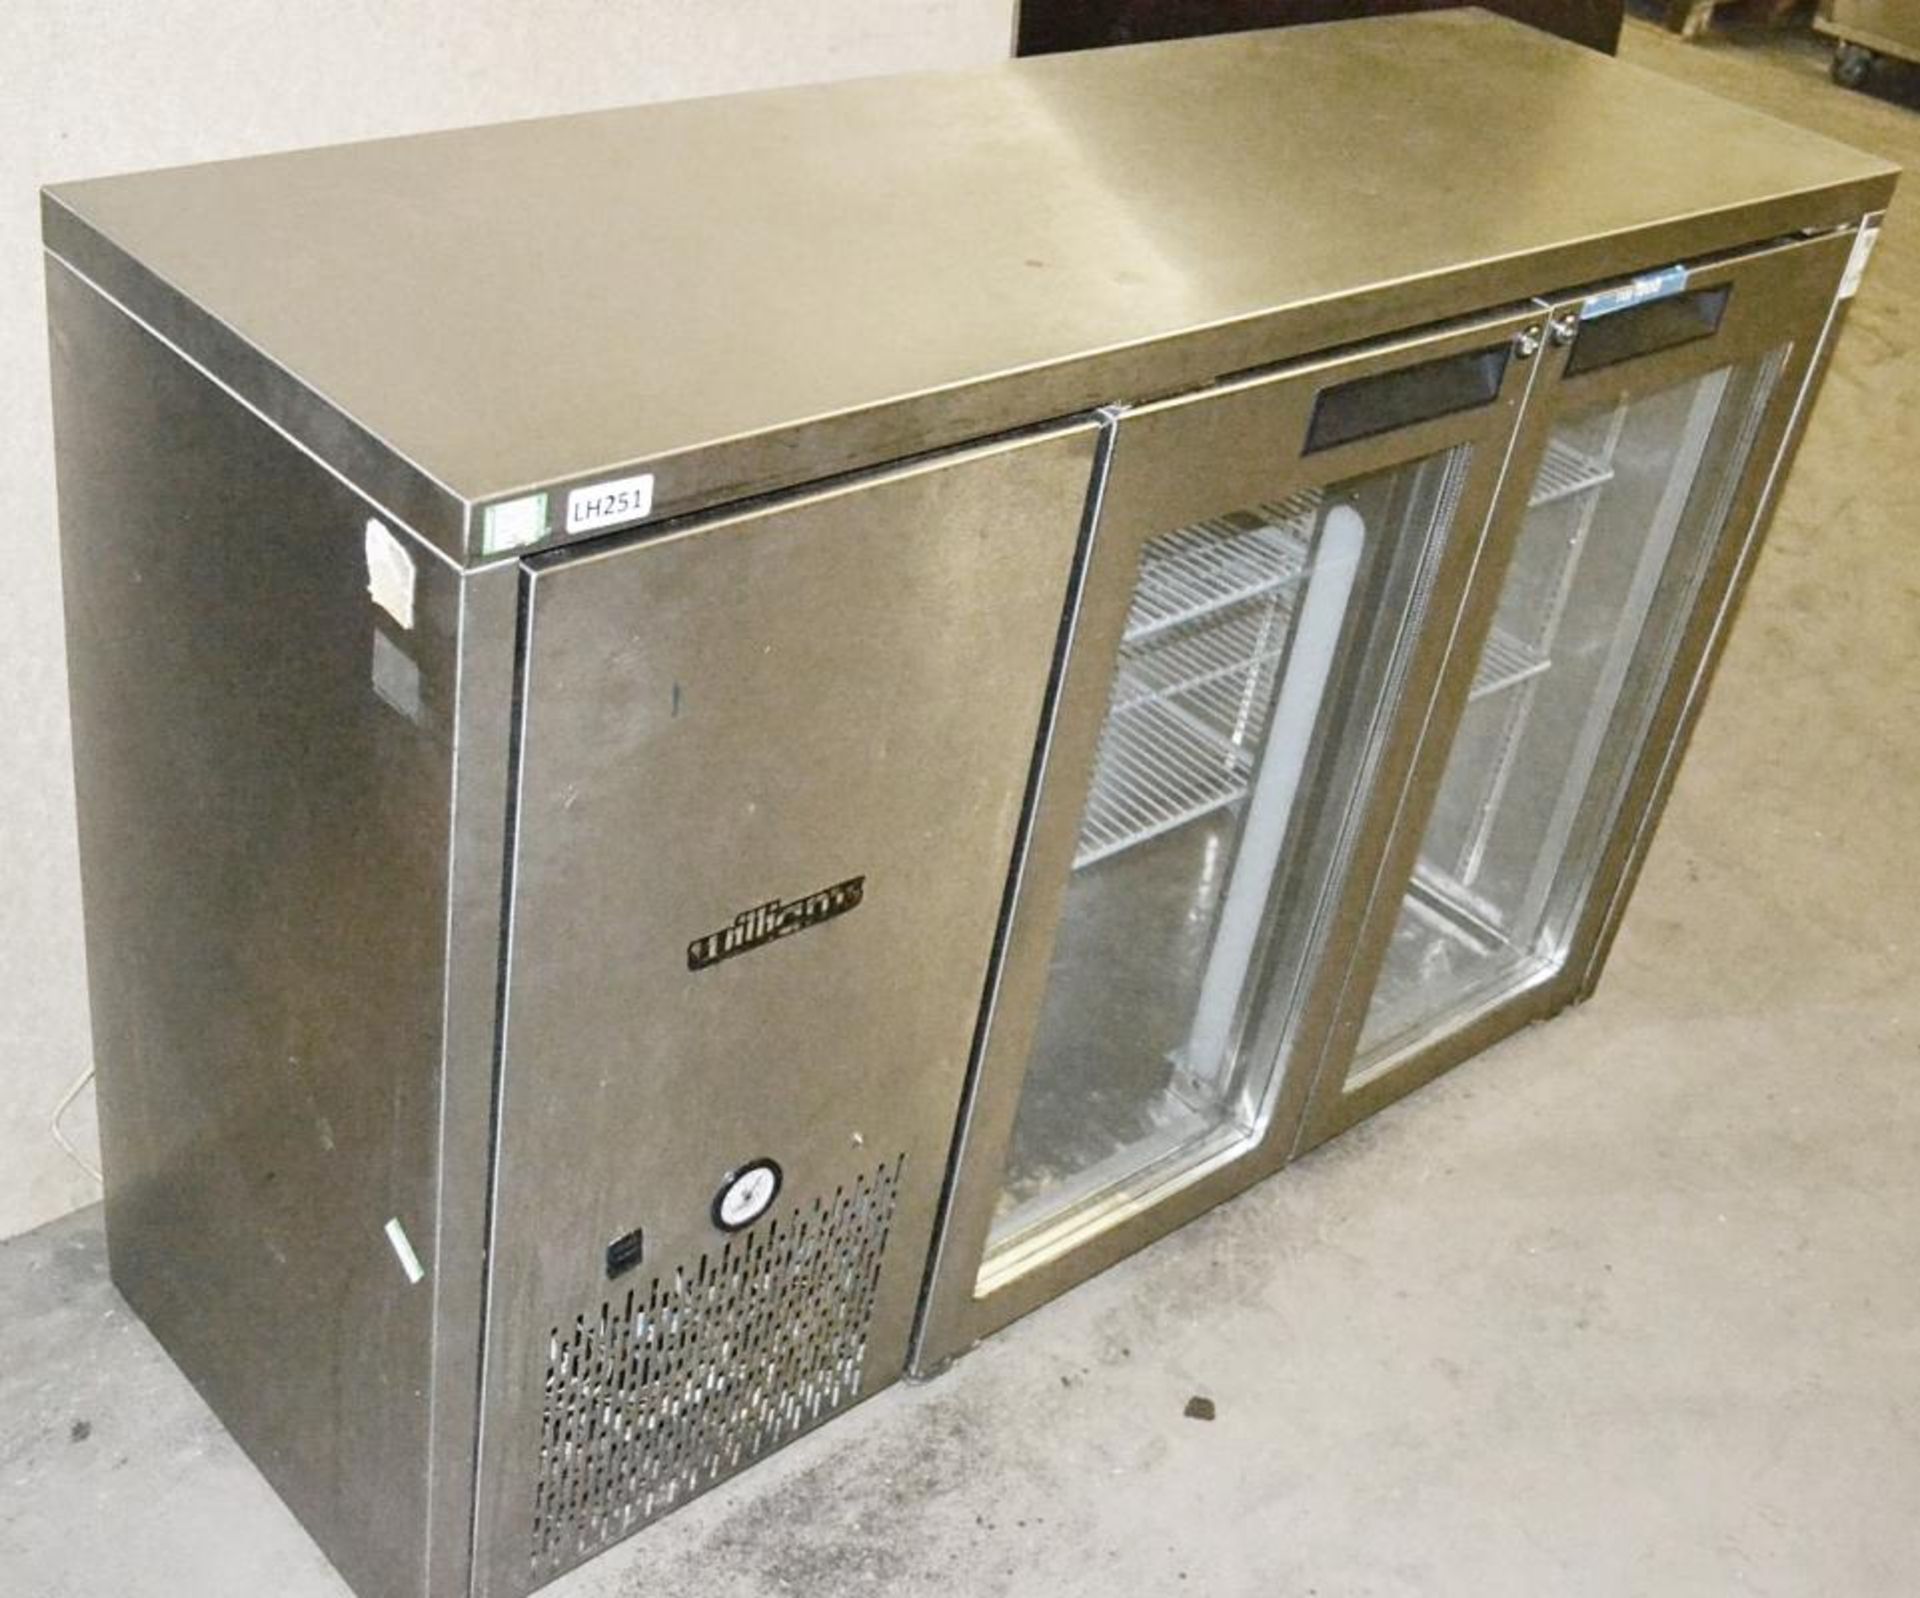 1 x Williams Stainless Steel Commercial 2-Door Refrigerated Unit With Shelving And Glass Doors (